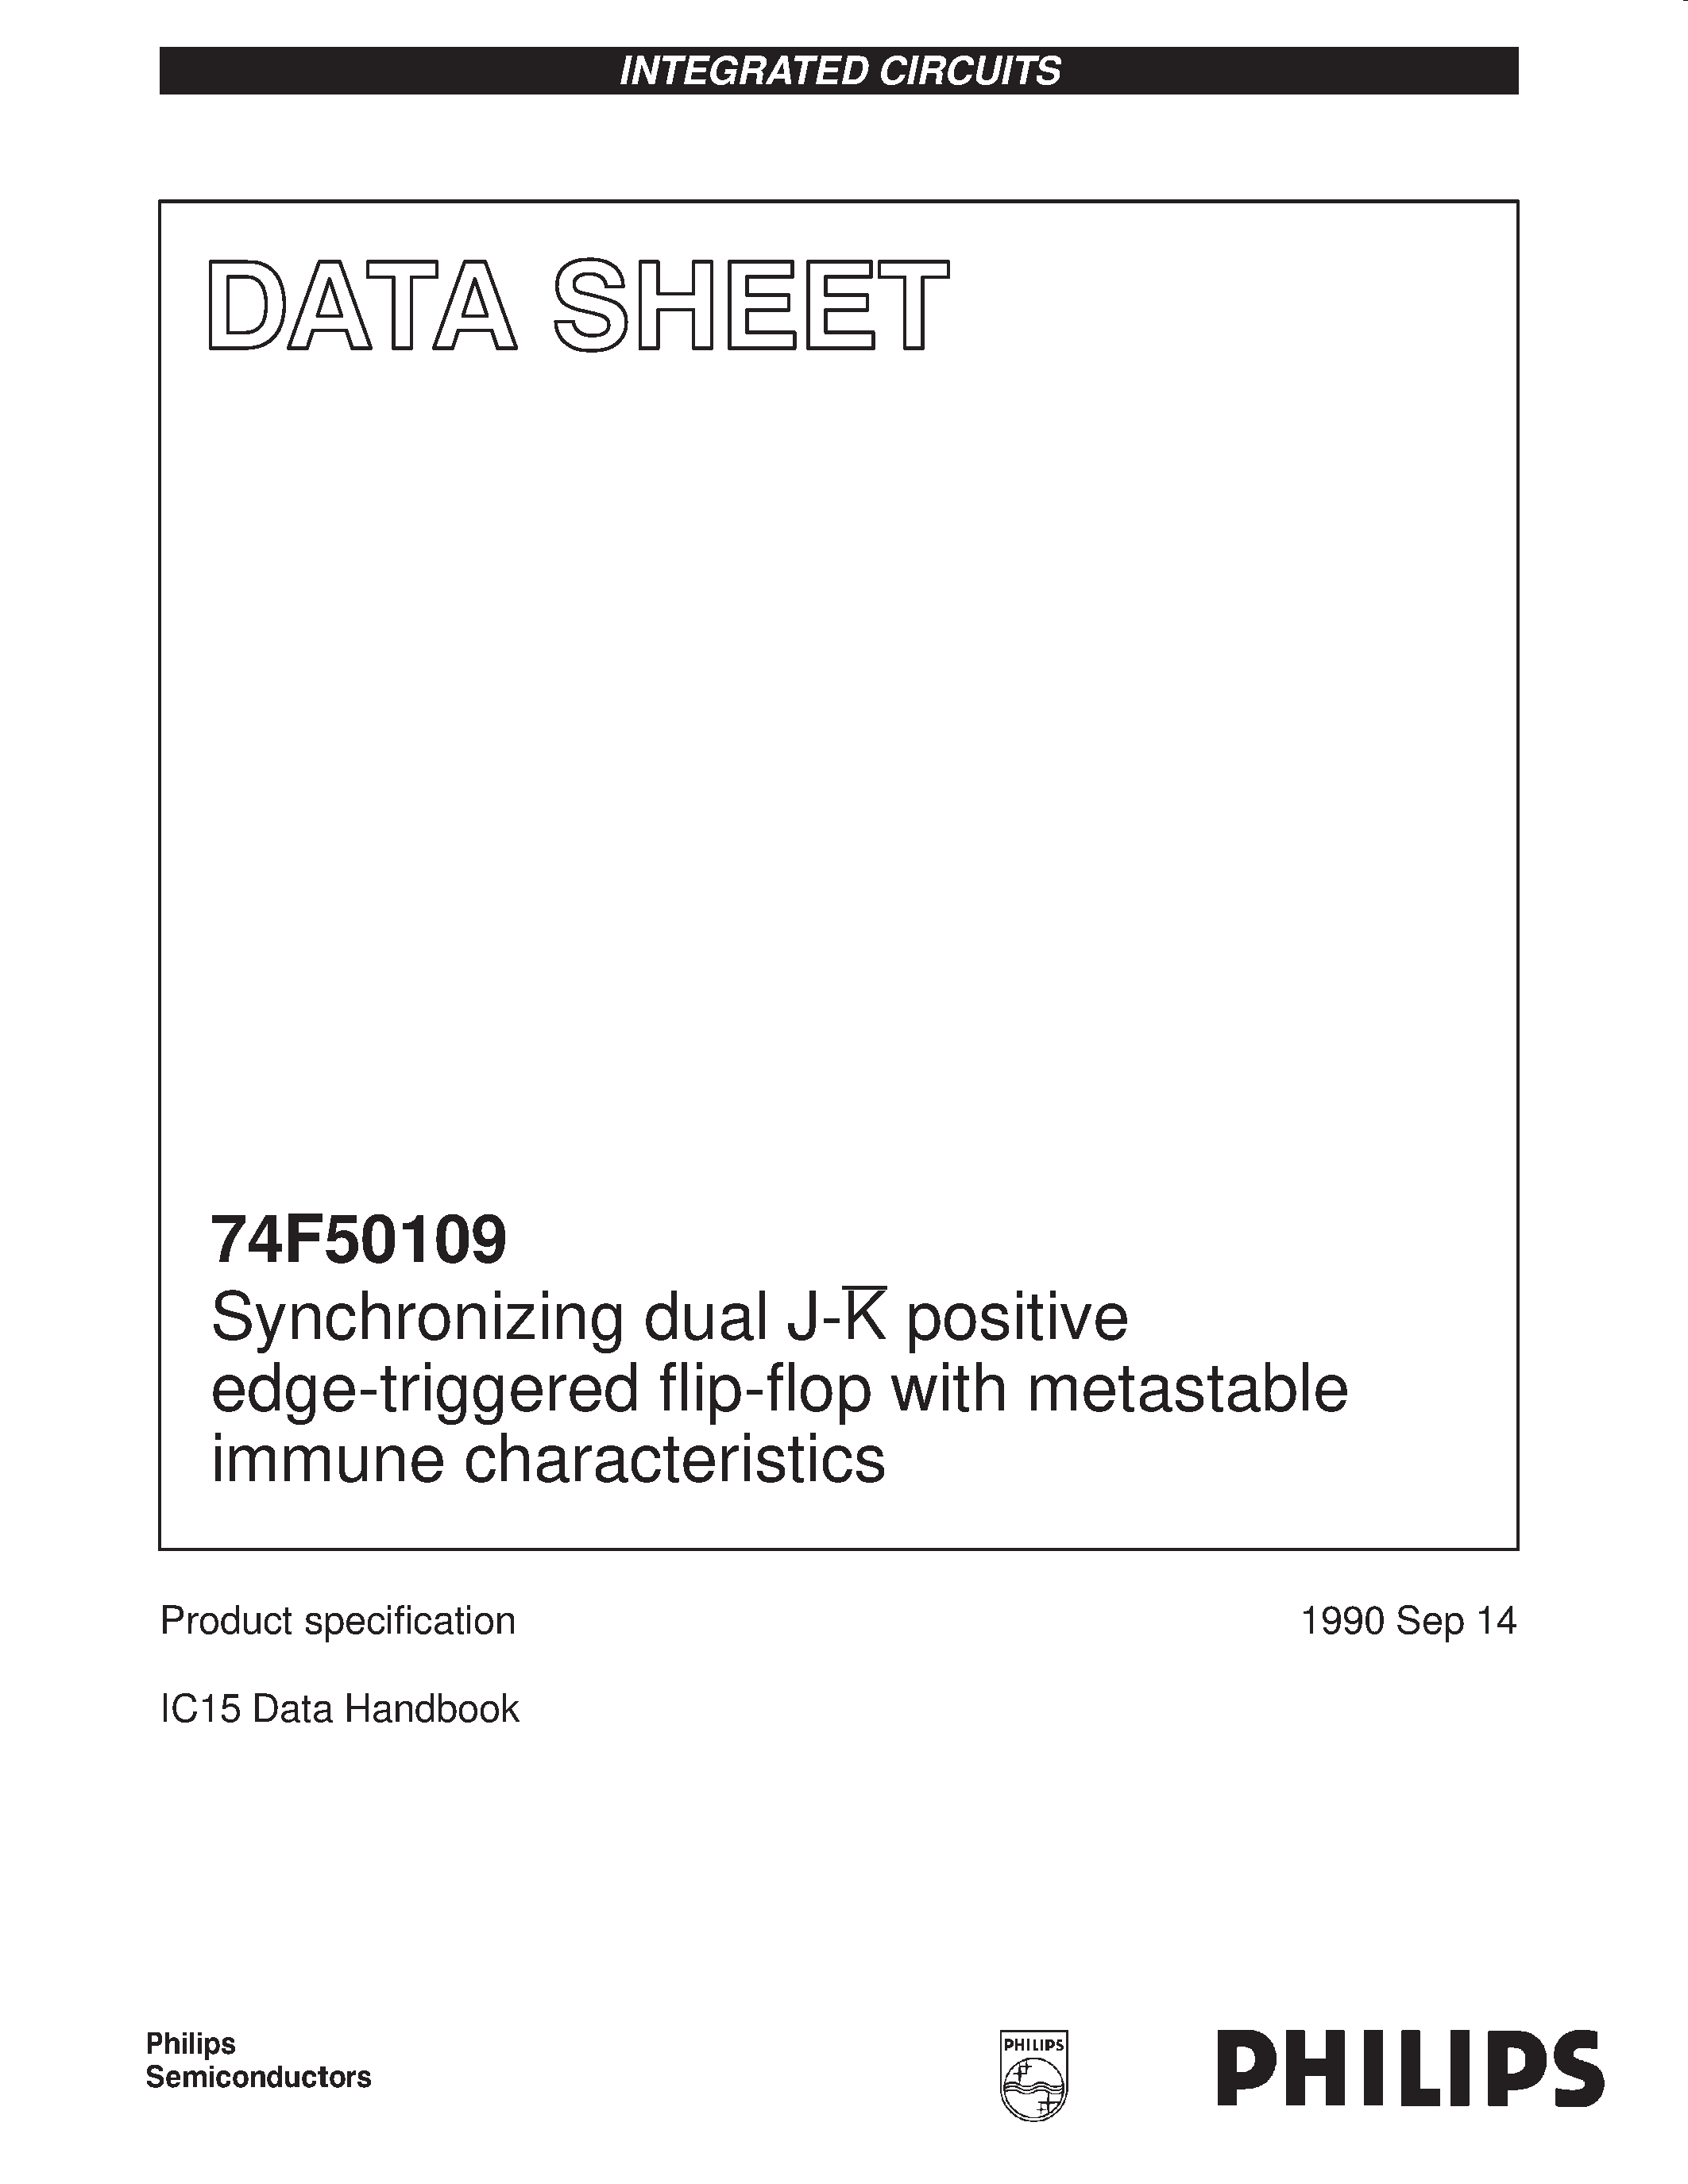 Datasheet N74F50109D - Synchronizing dual J-K positive edge-triggered flip-flop with metastable immune characteristics page 1